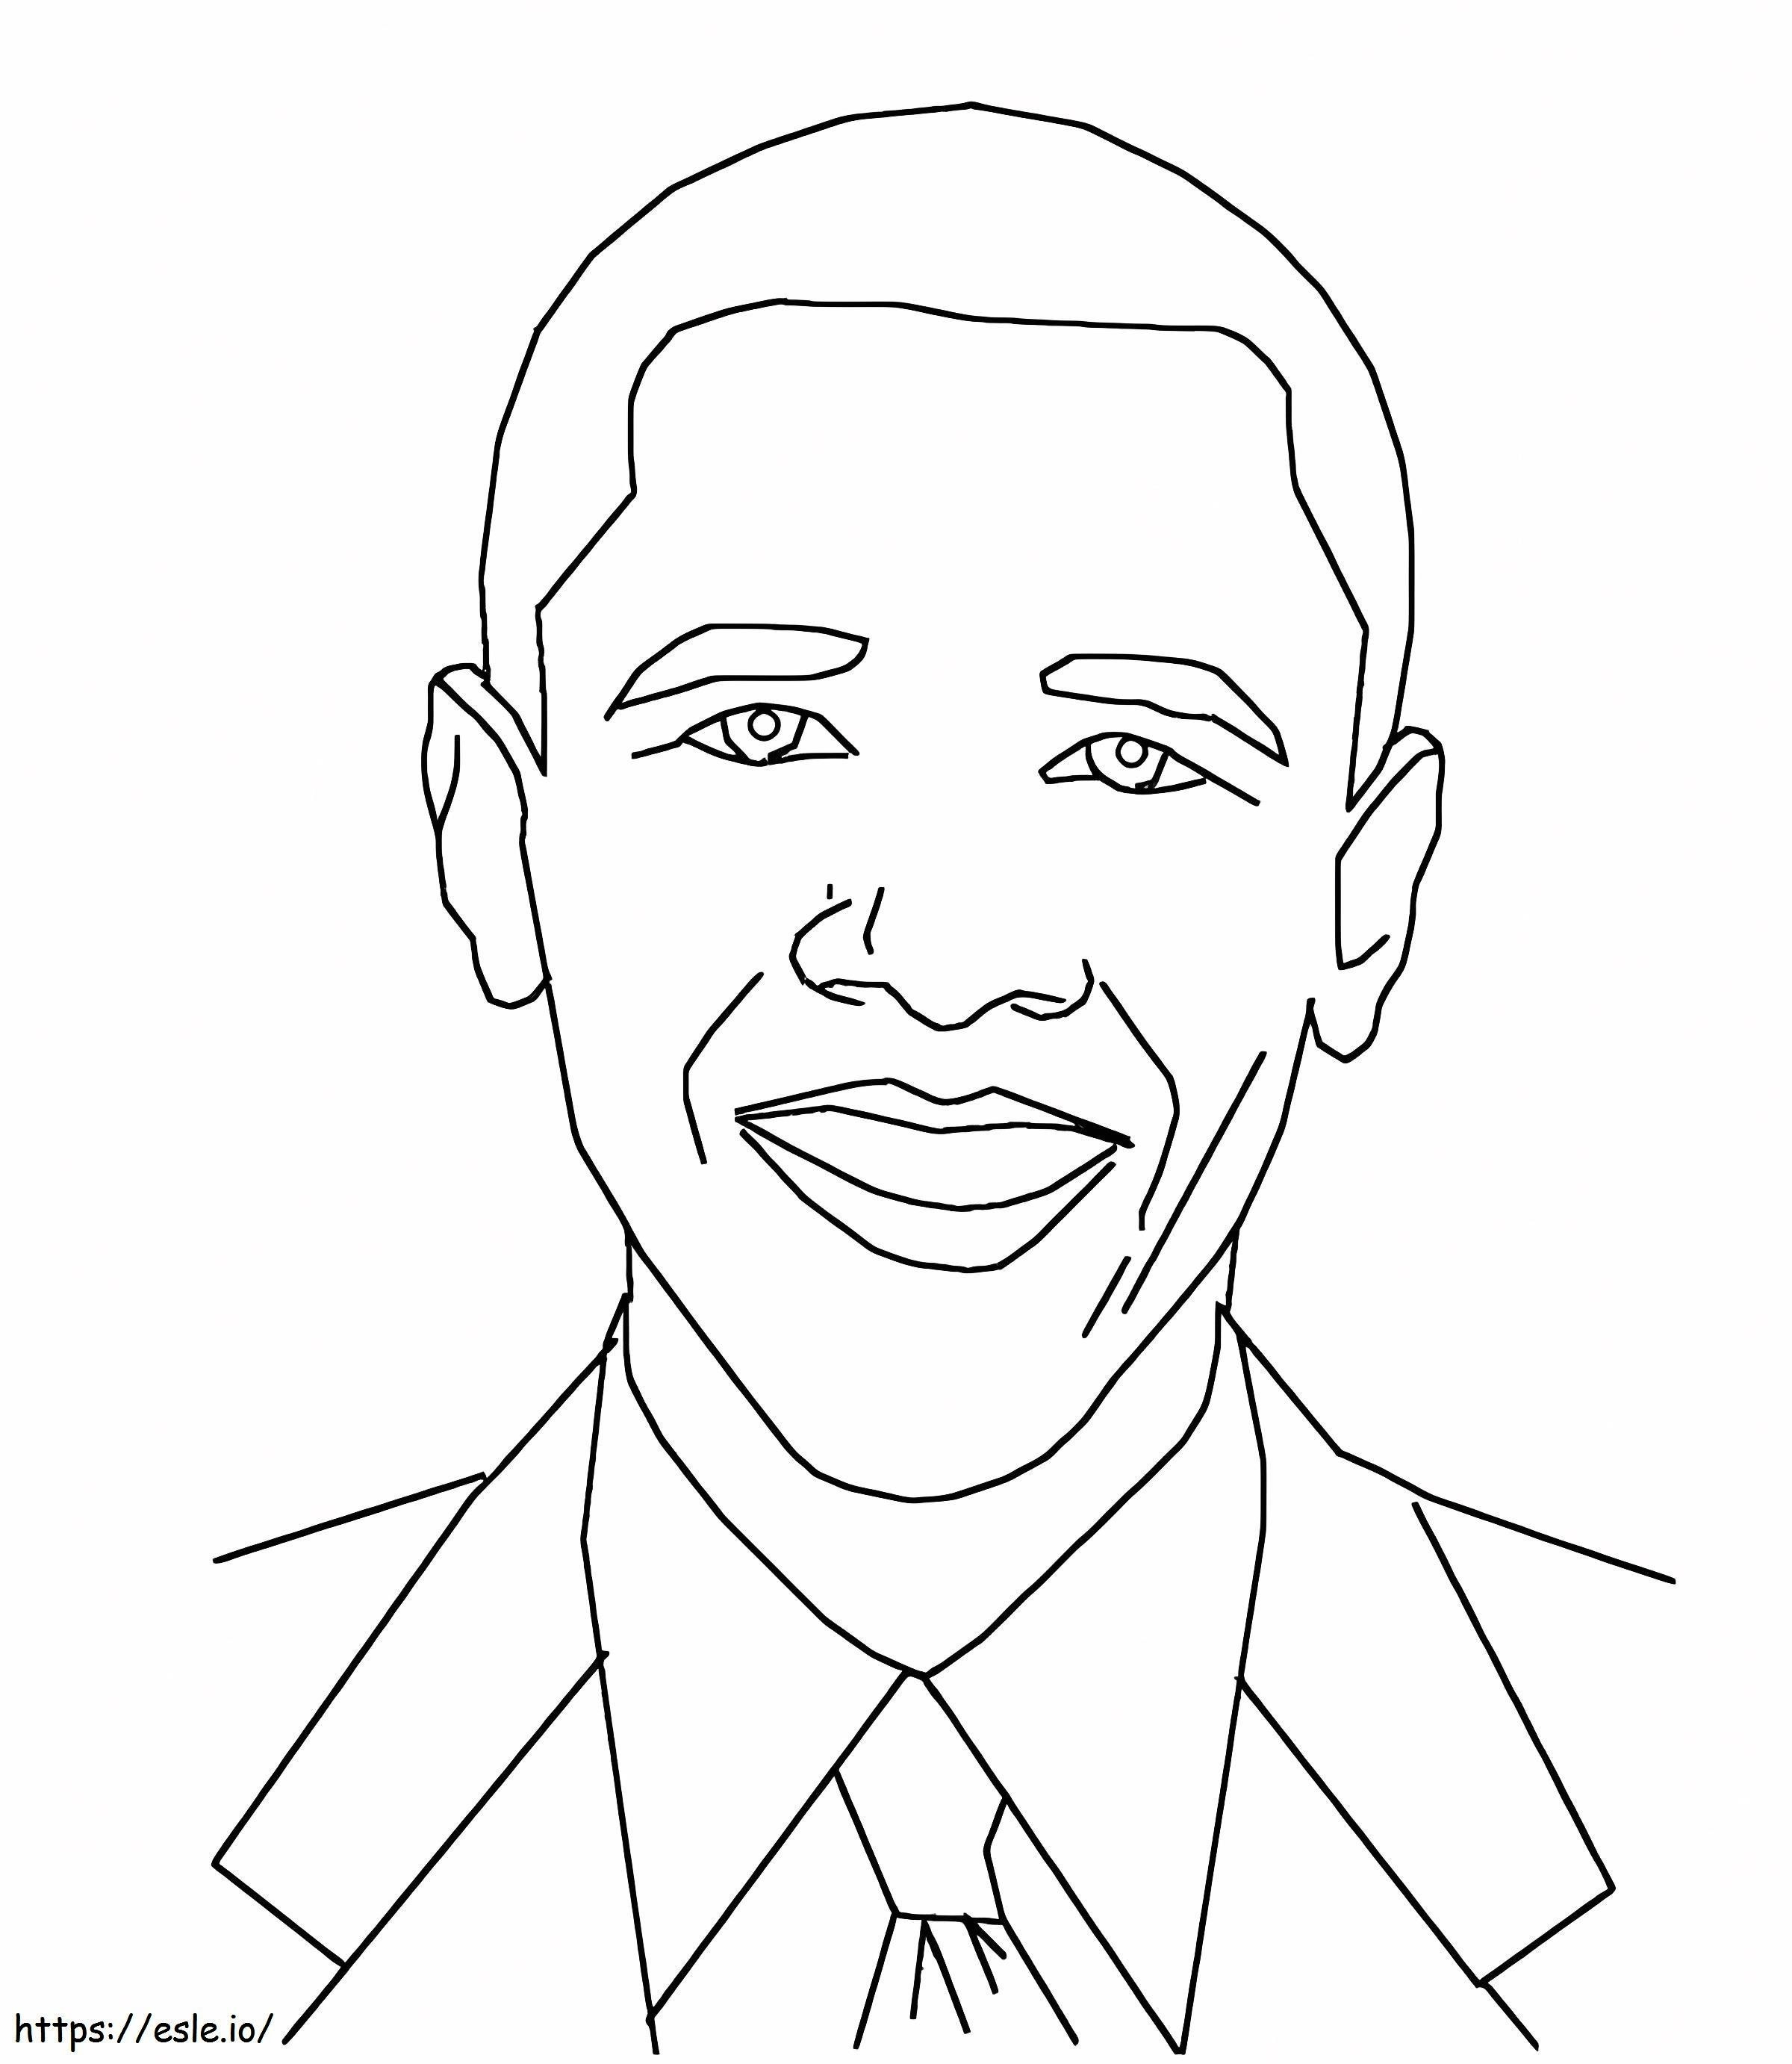 1541130996 Obama Free Amazing Michelle Obama Coloring Sheets coloring page